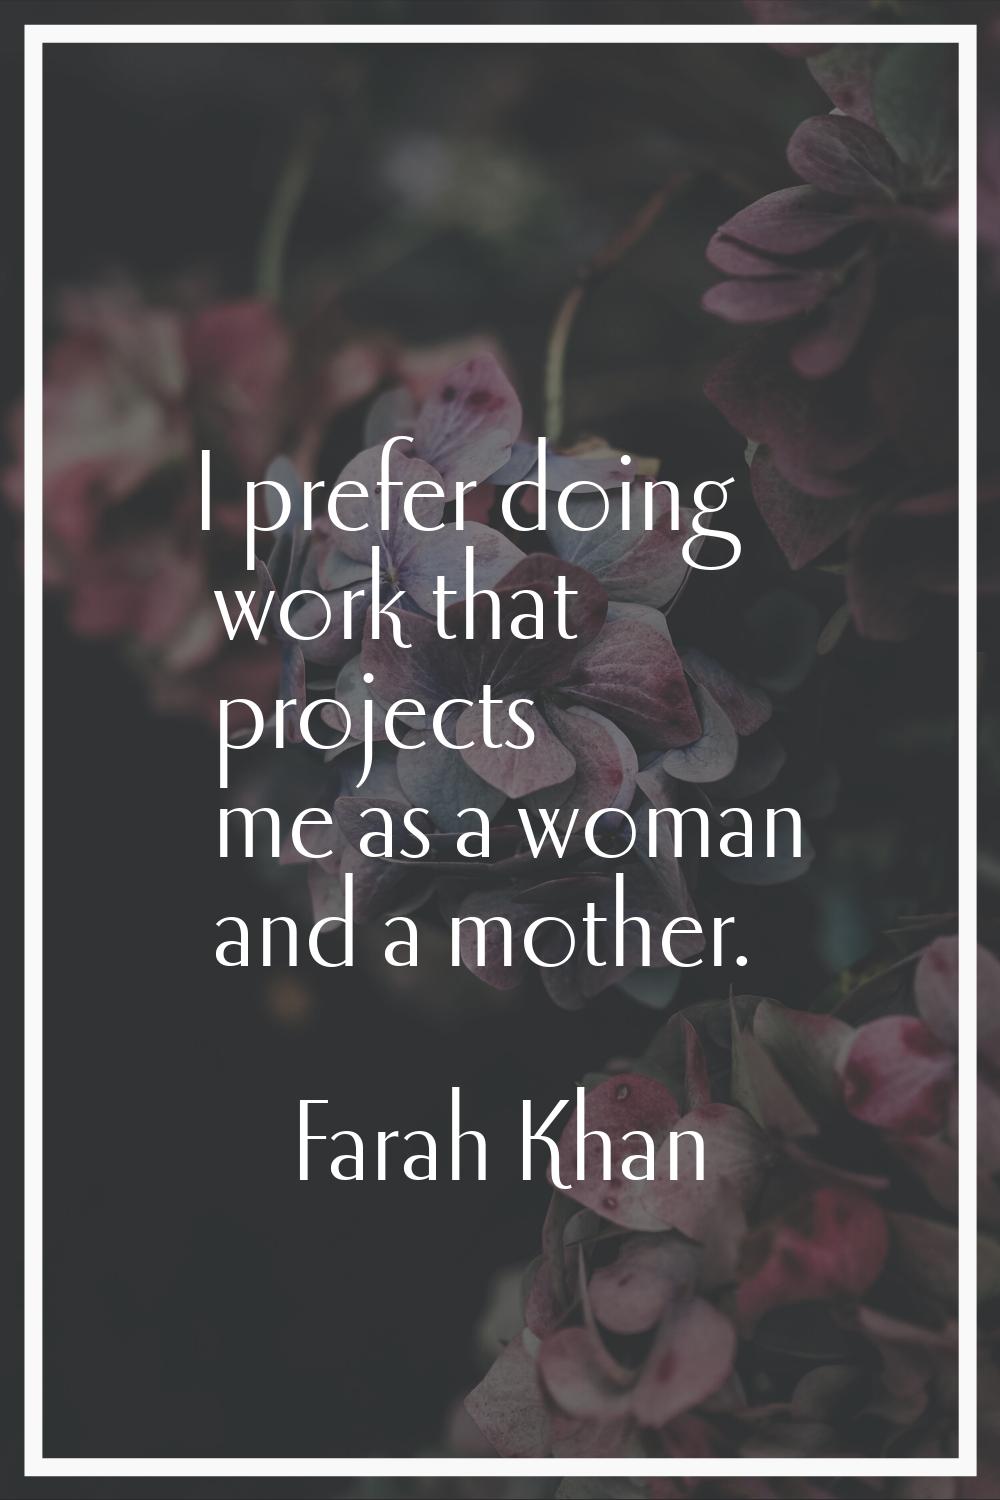 I prefer doing work that projects me as a woman and a mother.